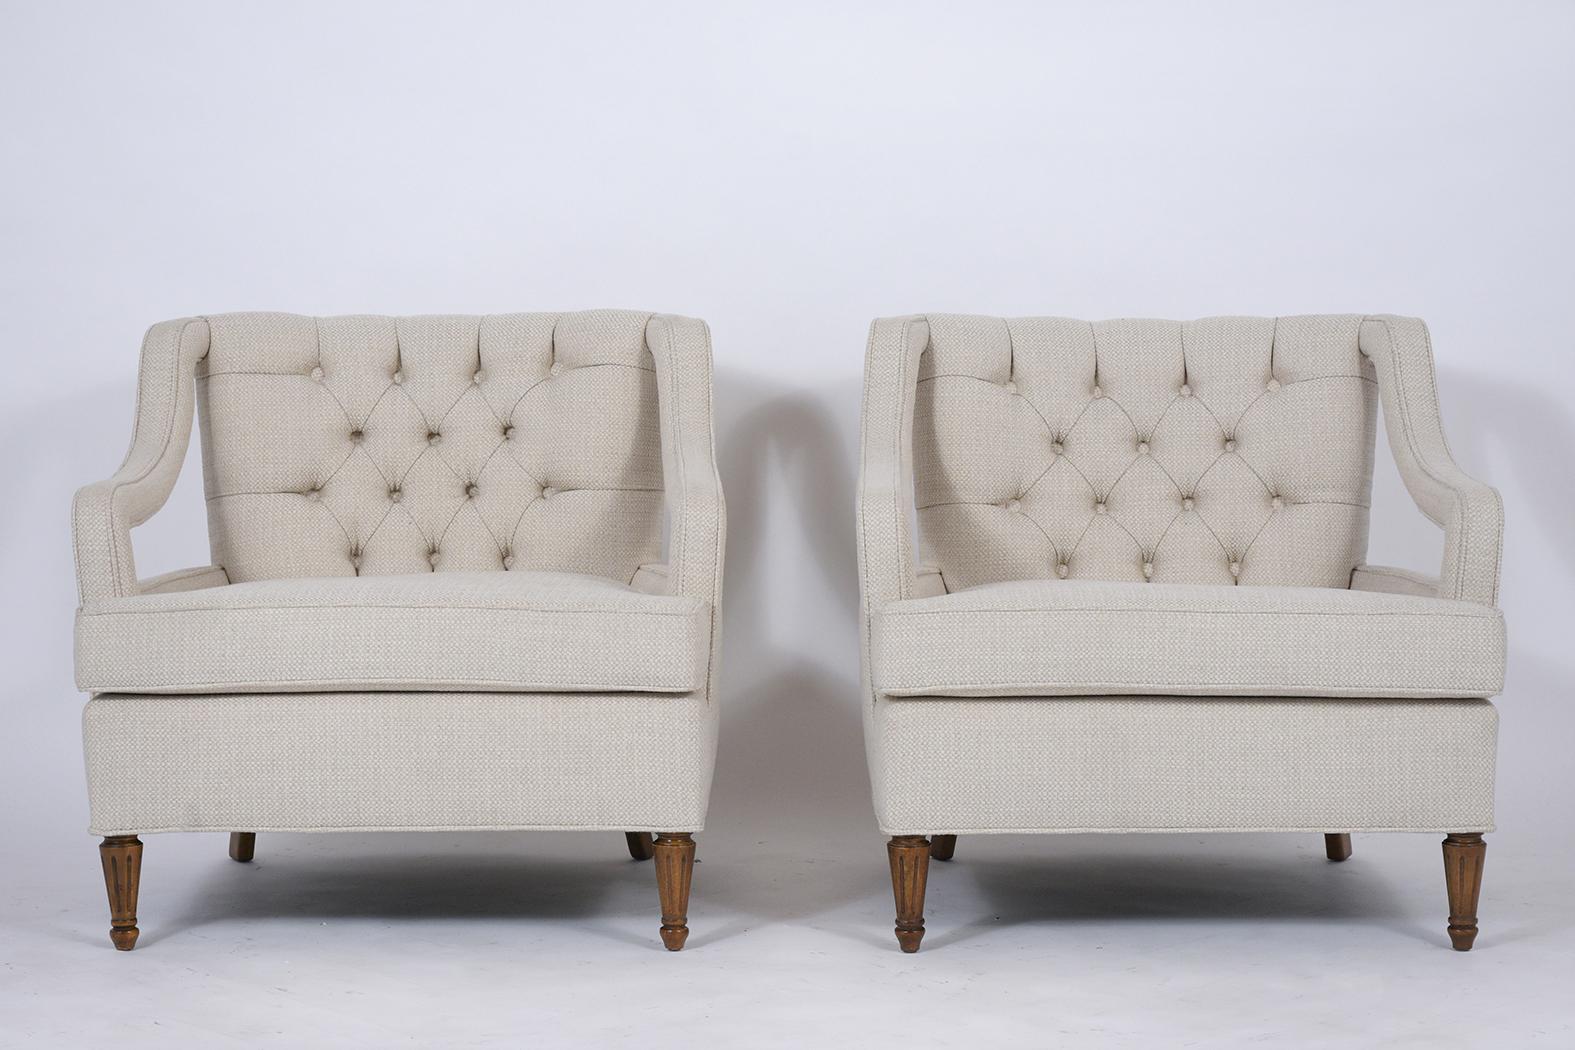 This pair of 1960s midcentury lounge chairs have been completely restored and feature a stylish curved back and open arm design. These club chairs have been professionally upholstered in beige color fabric tufted design with single piping trim